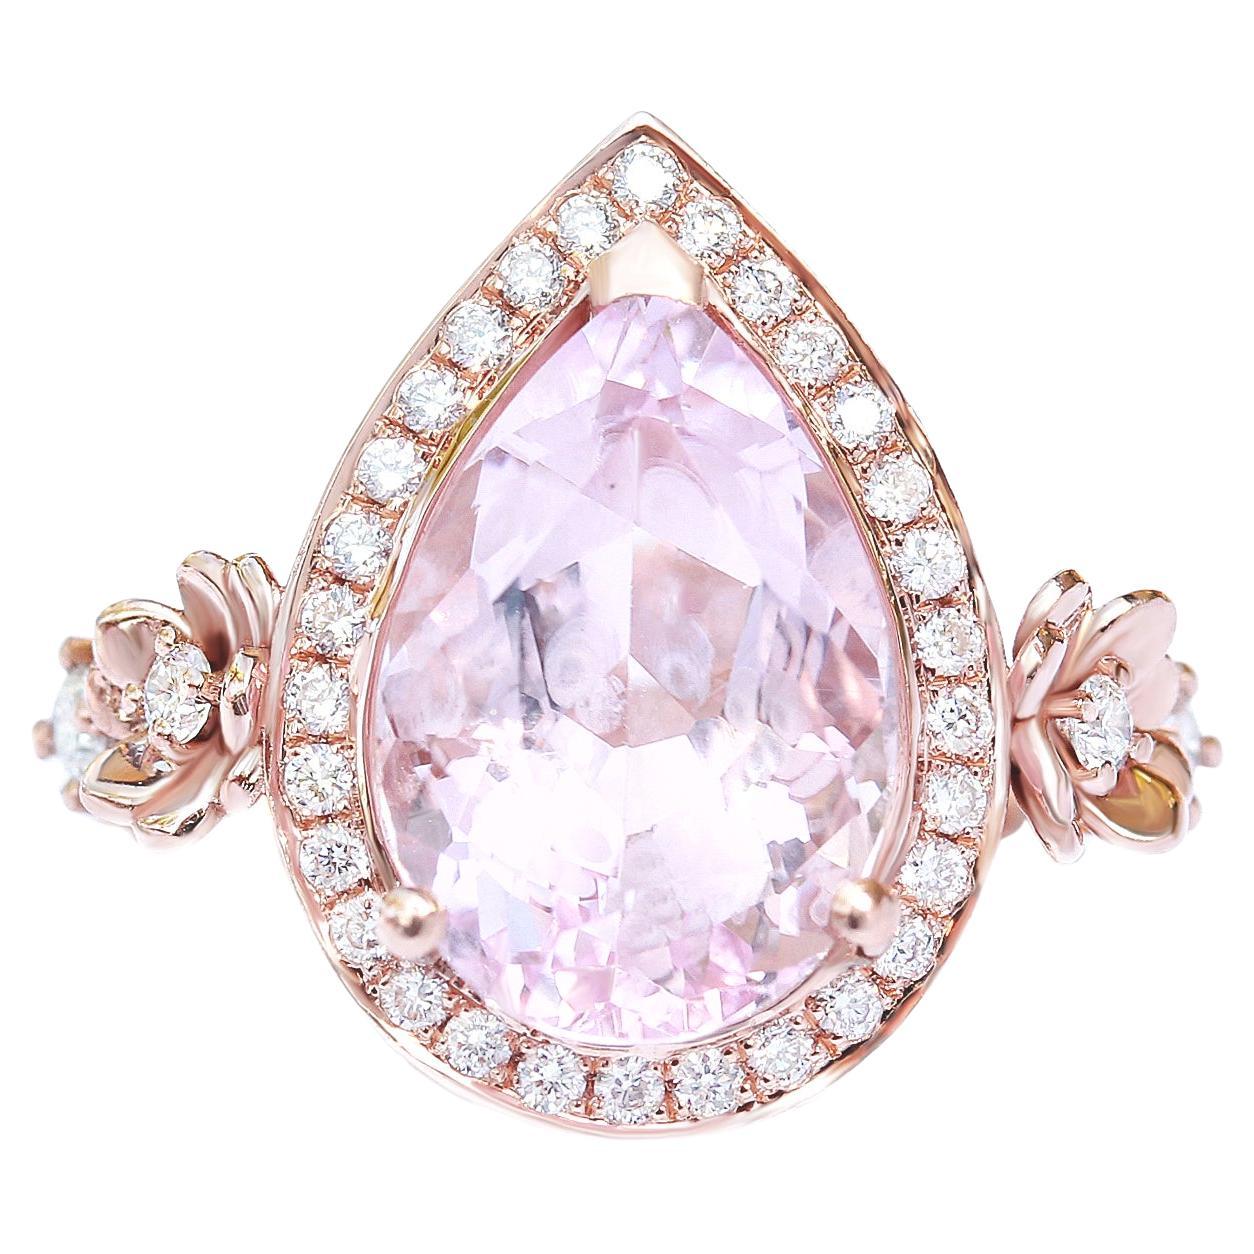 Big Pear Morganite Diamond Halo Engagement Ring with Flower Band, Antheia